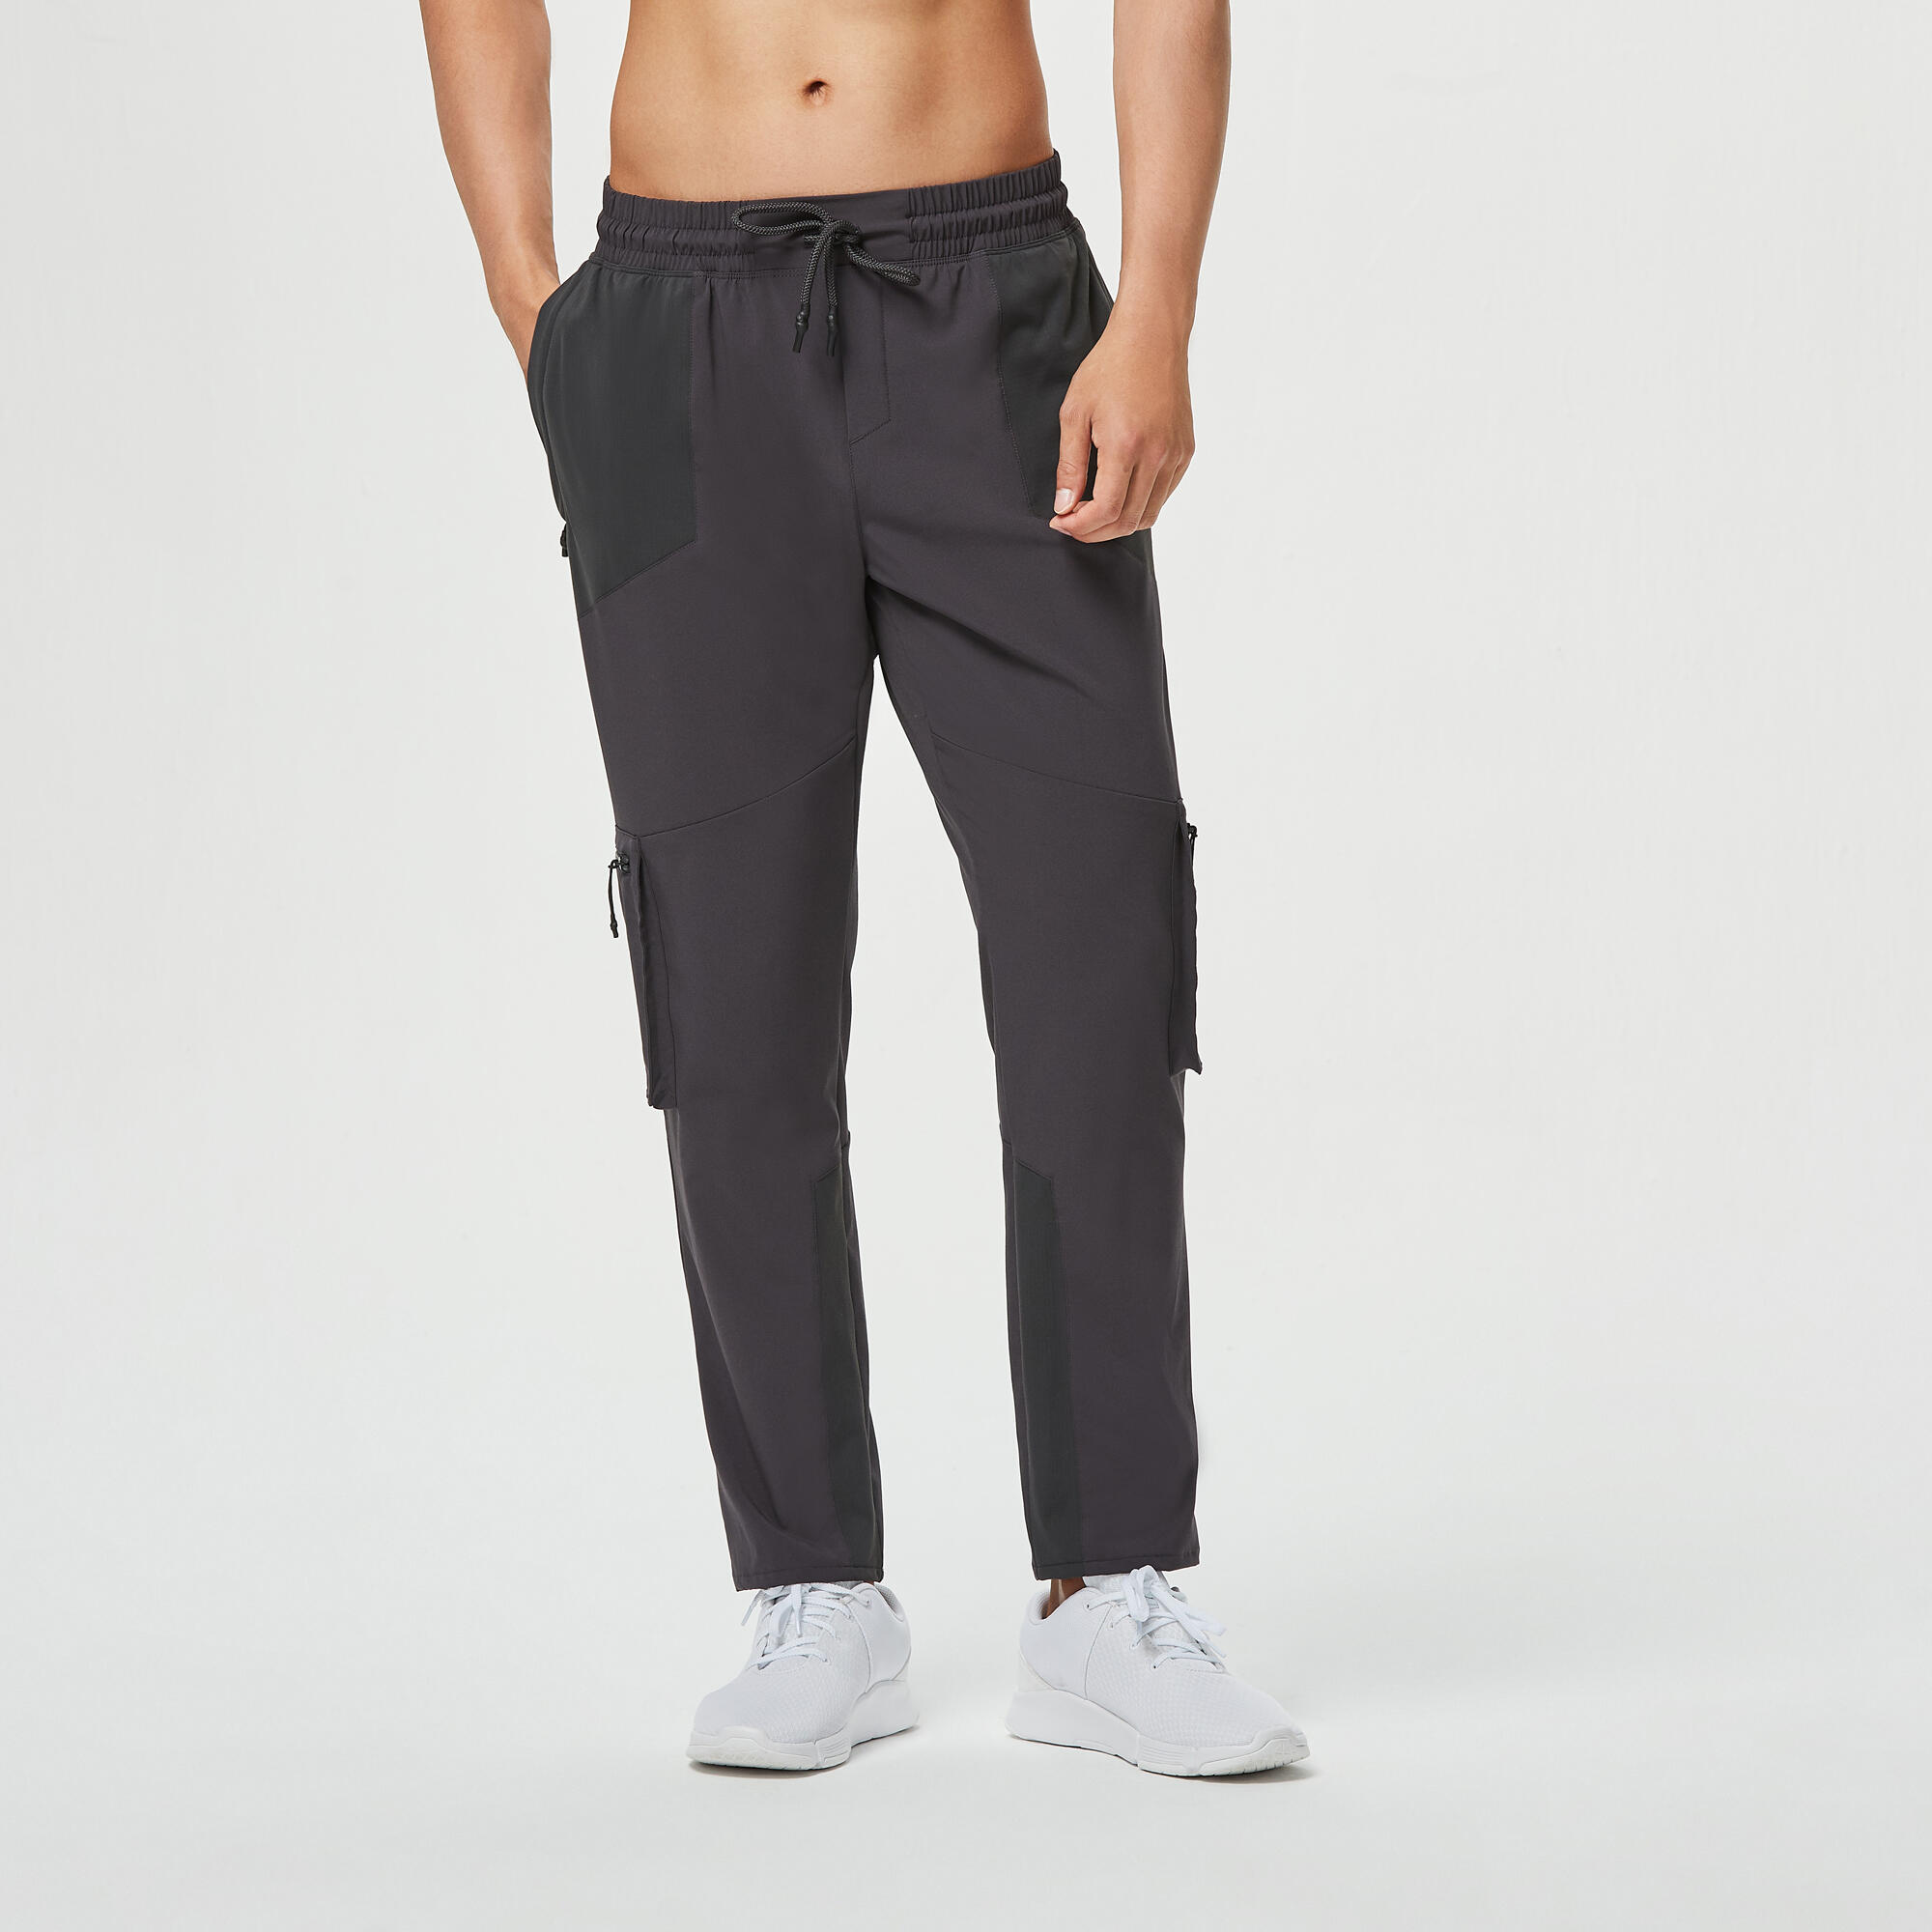 Men Gym Trackpant Joggers with Zip Pocket - Grey